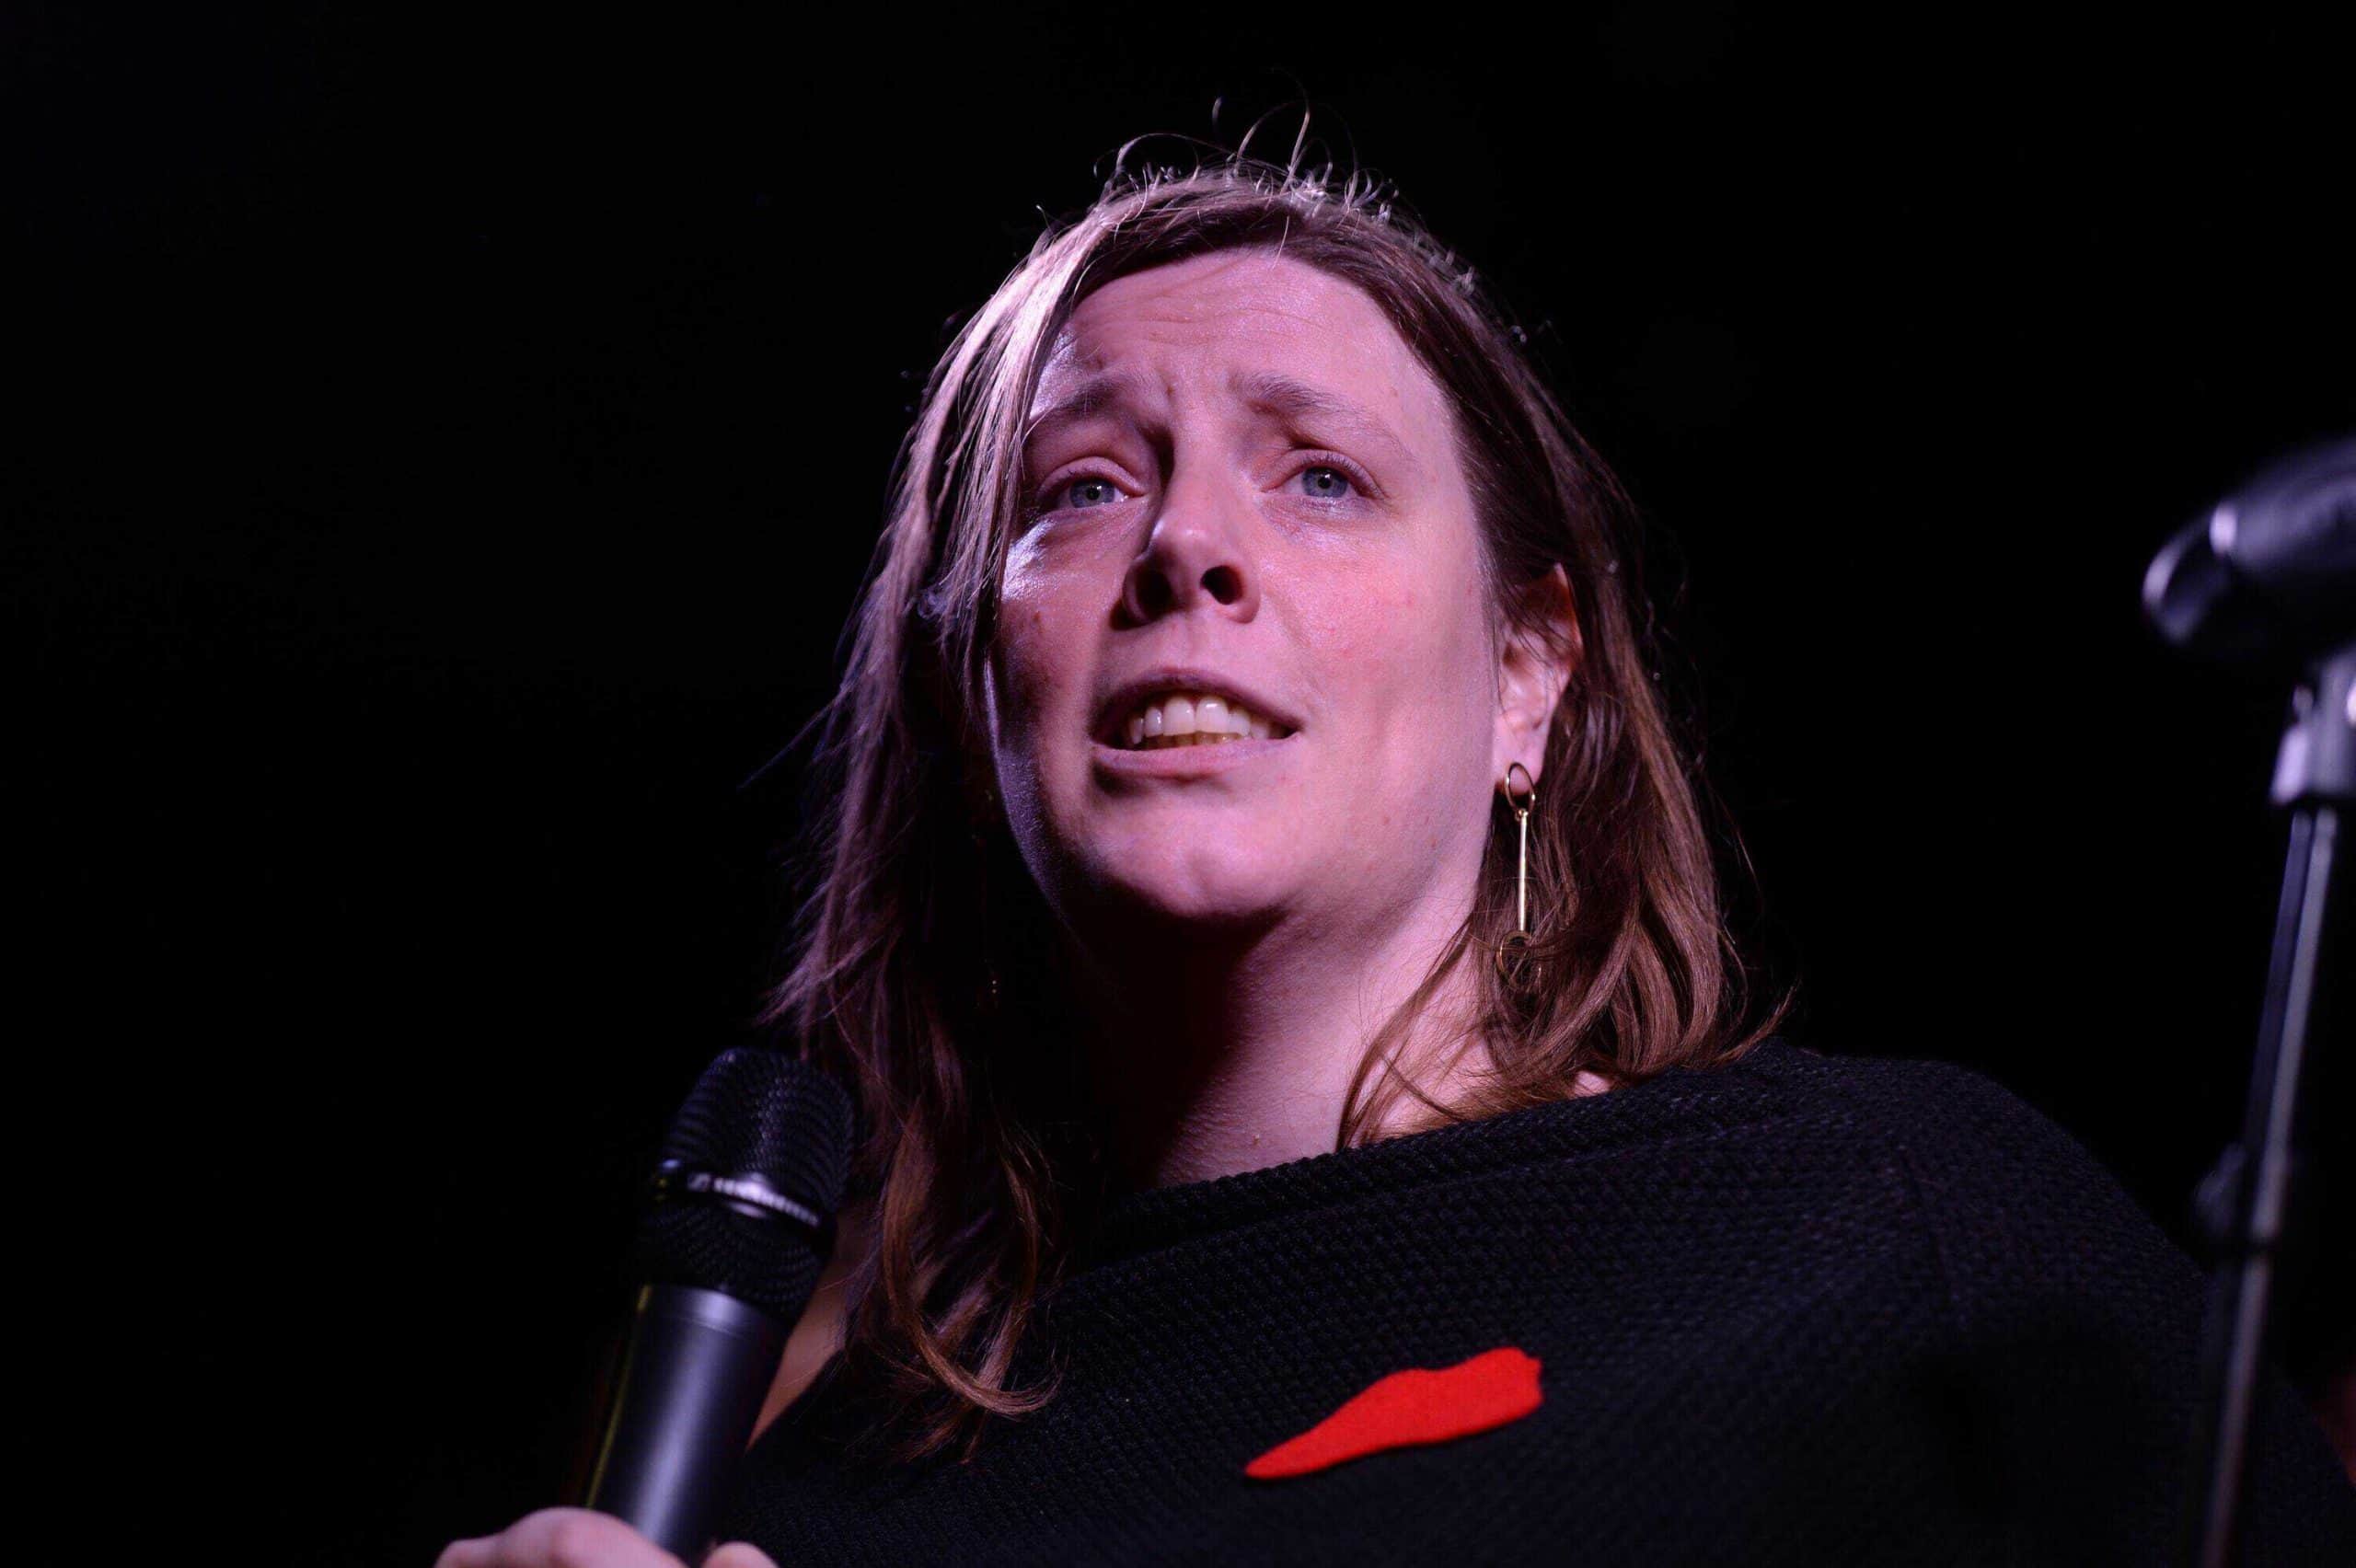 Labour’s Jess Phillips says man arrested at her constituency office